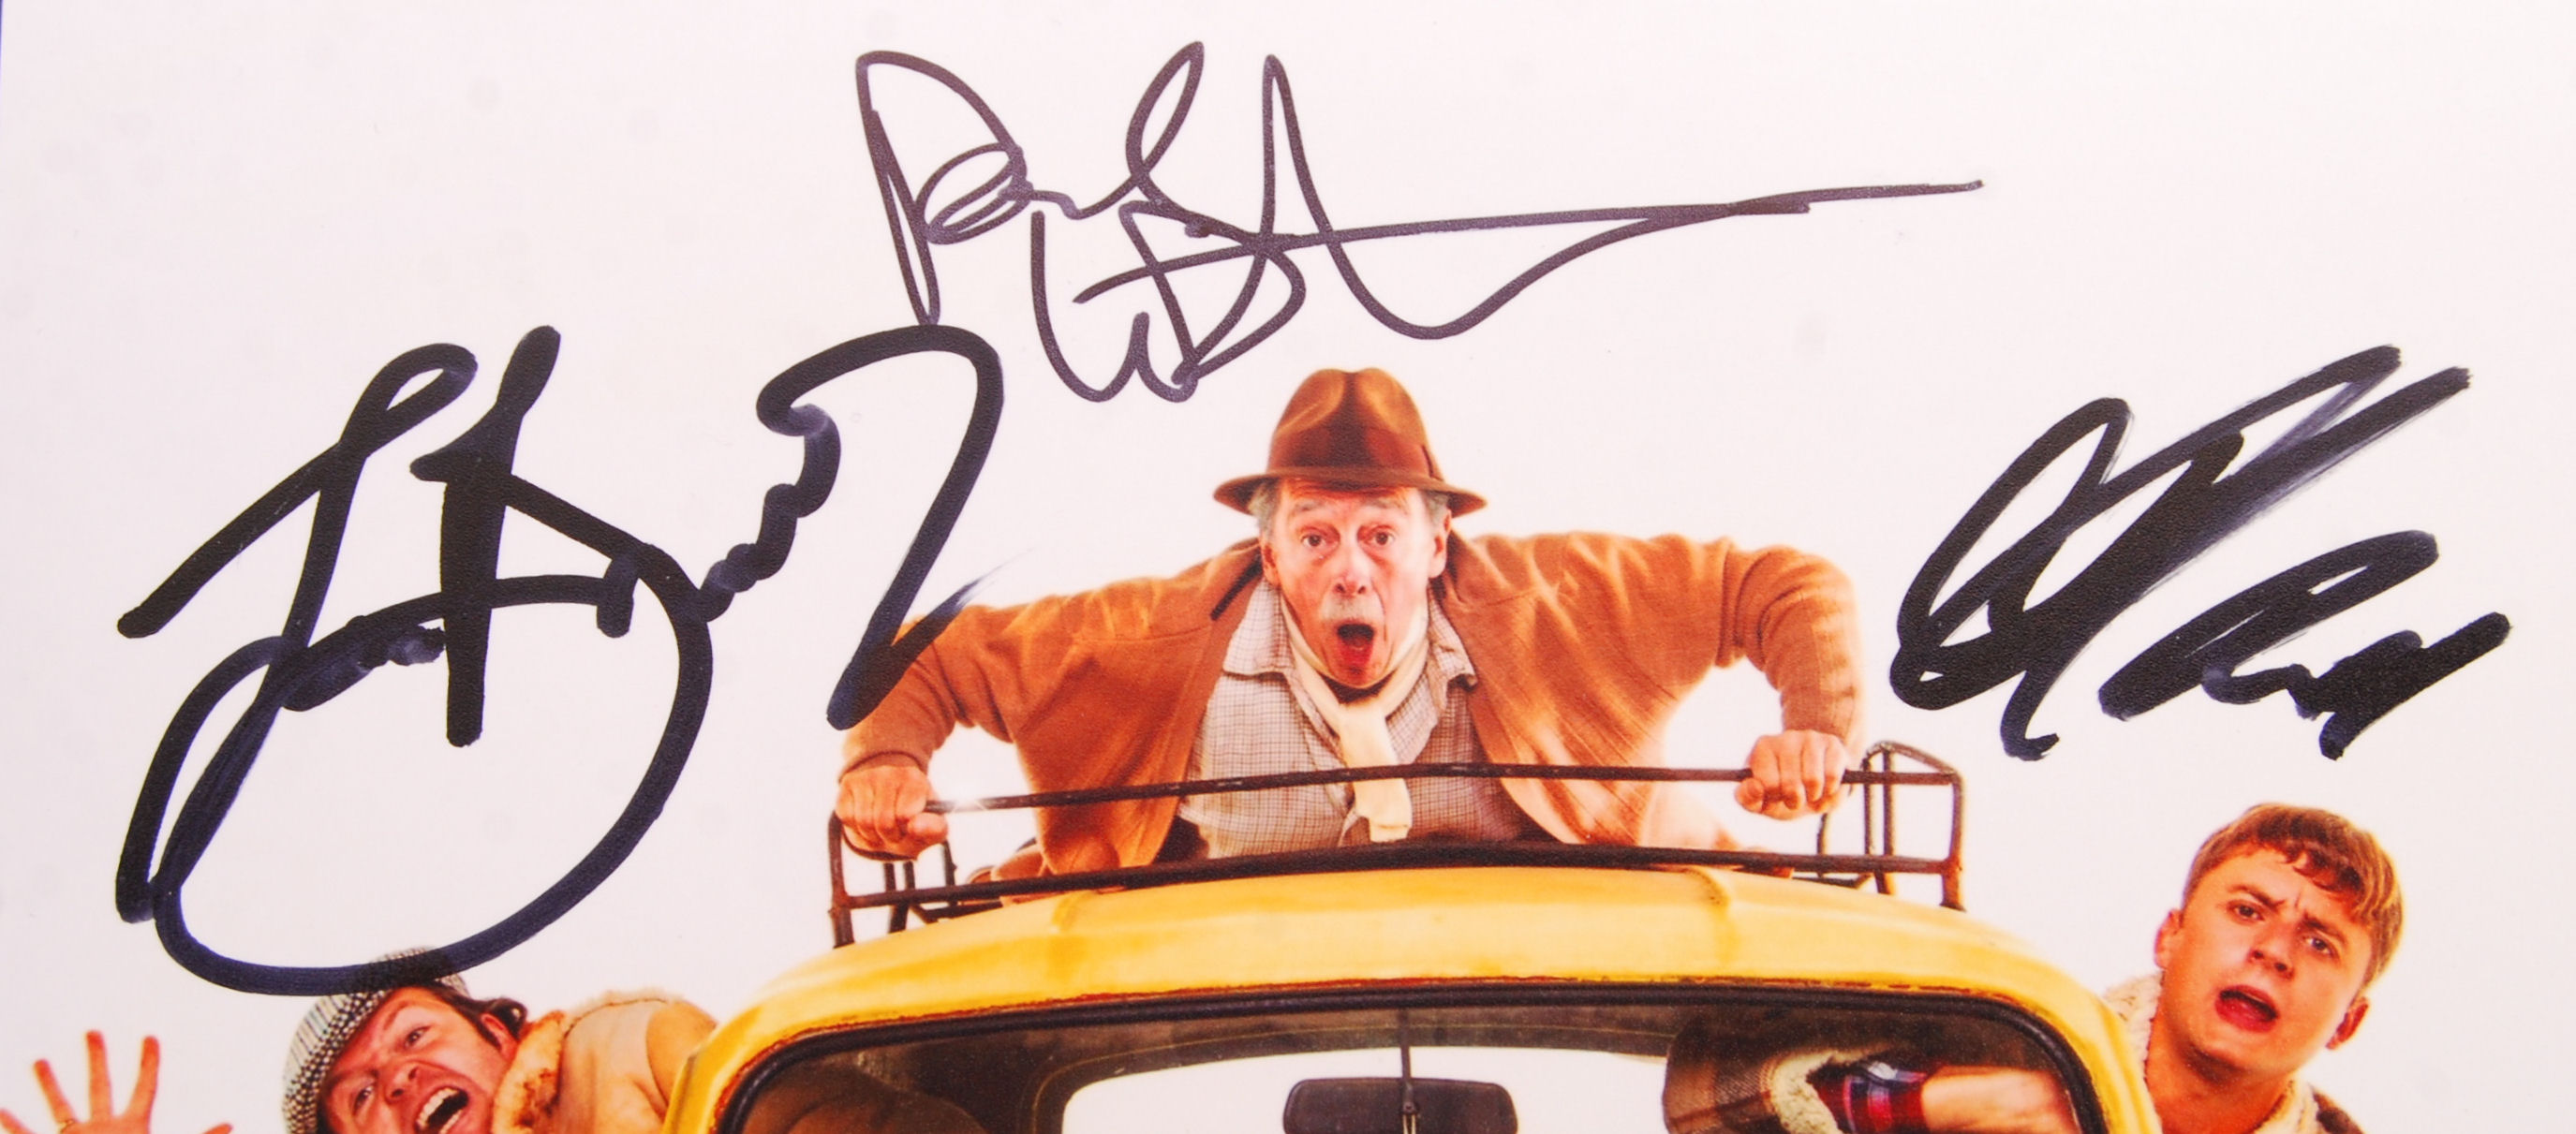 ONLY FOOLS & HORSES THE MUSICAL - CAST SIGNED PHOTOGRAPH - Image 2 of 2